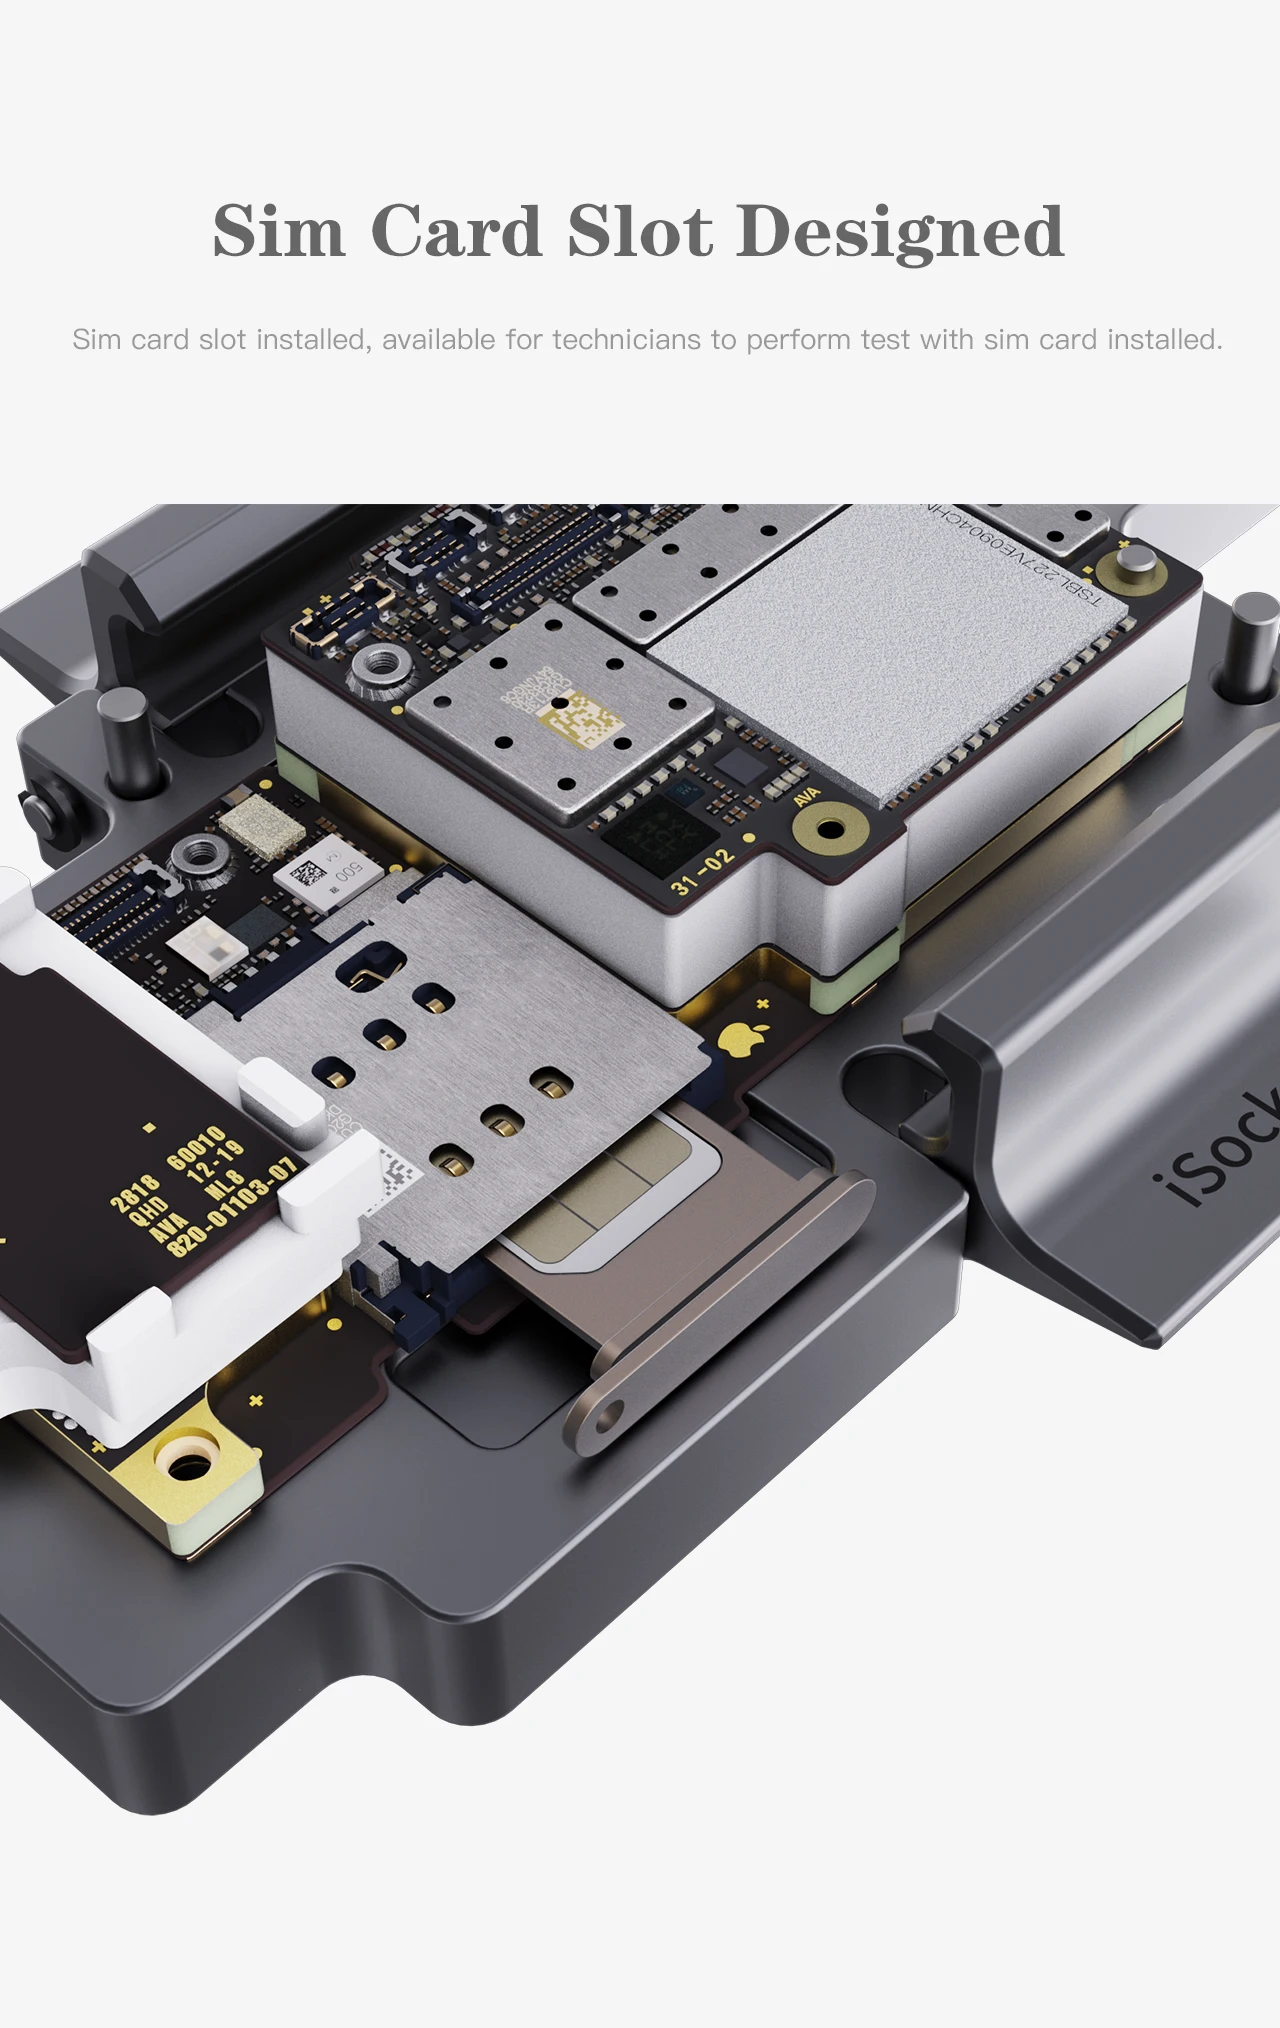 iSocket from QianLi for iPhone XS/ XS MAX  motherboard test and repair